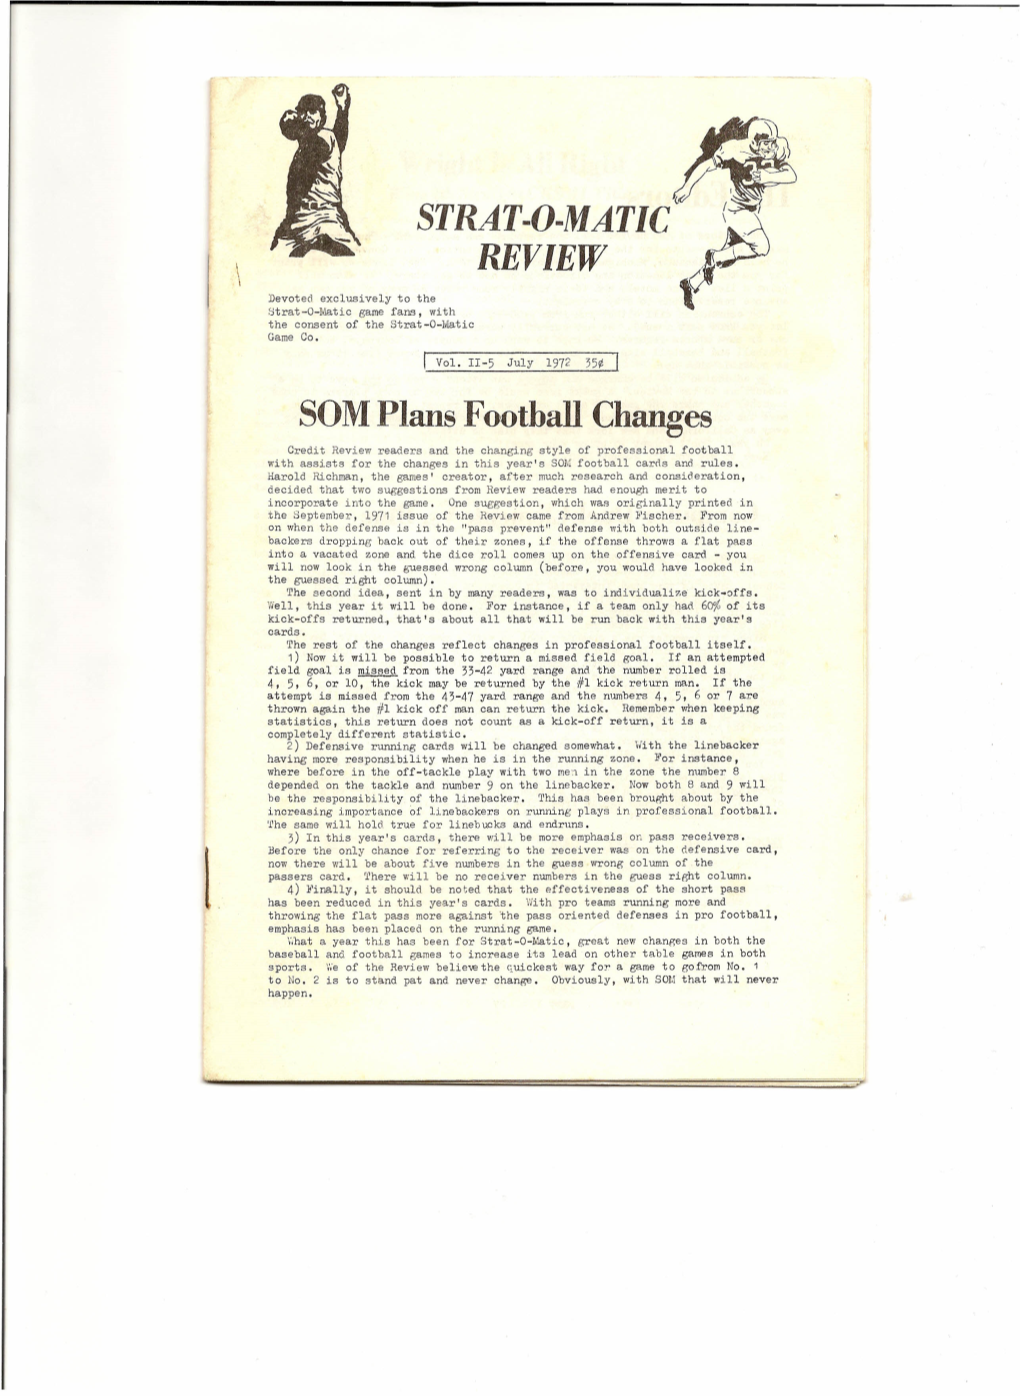 July 1972 35¢ SOM Plans Football Changes